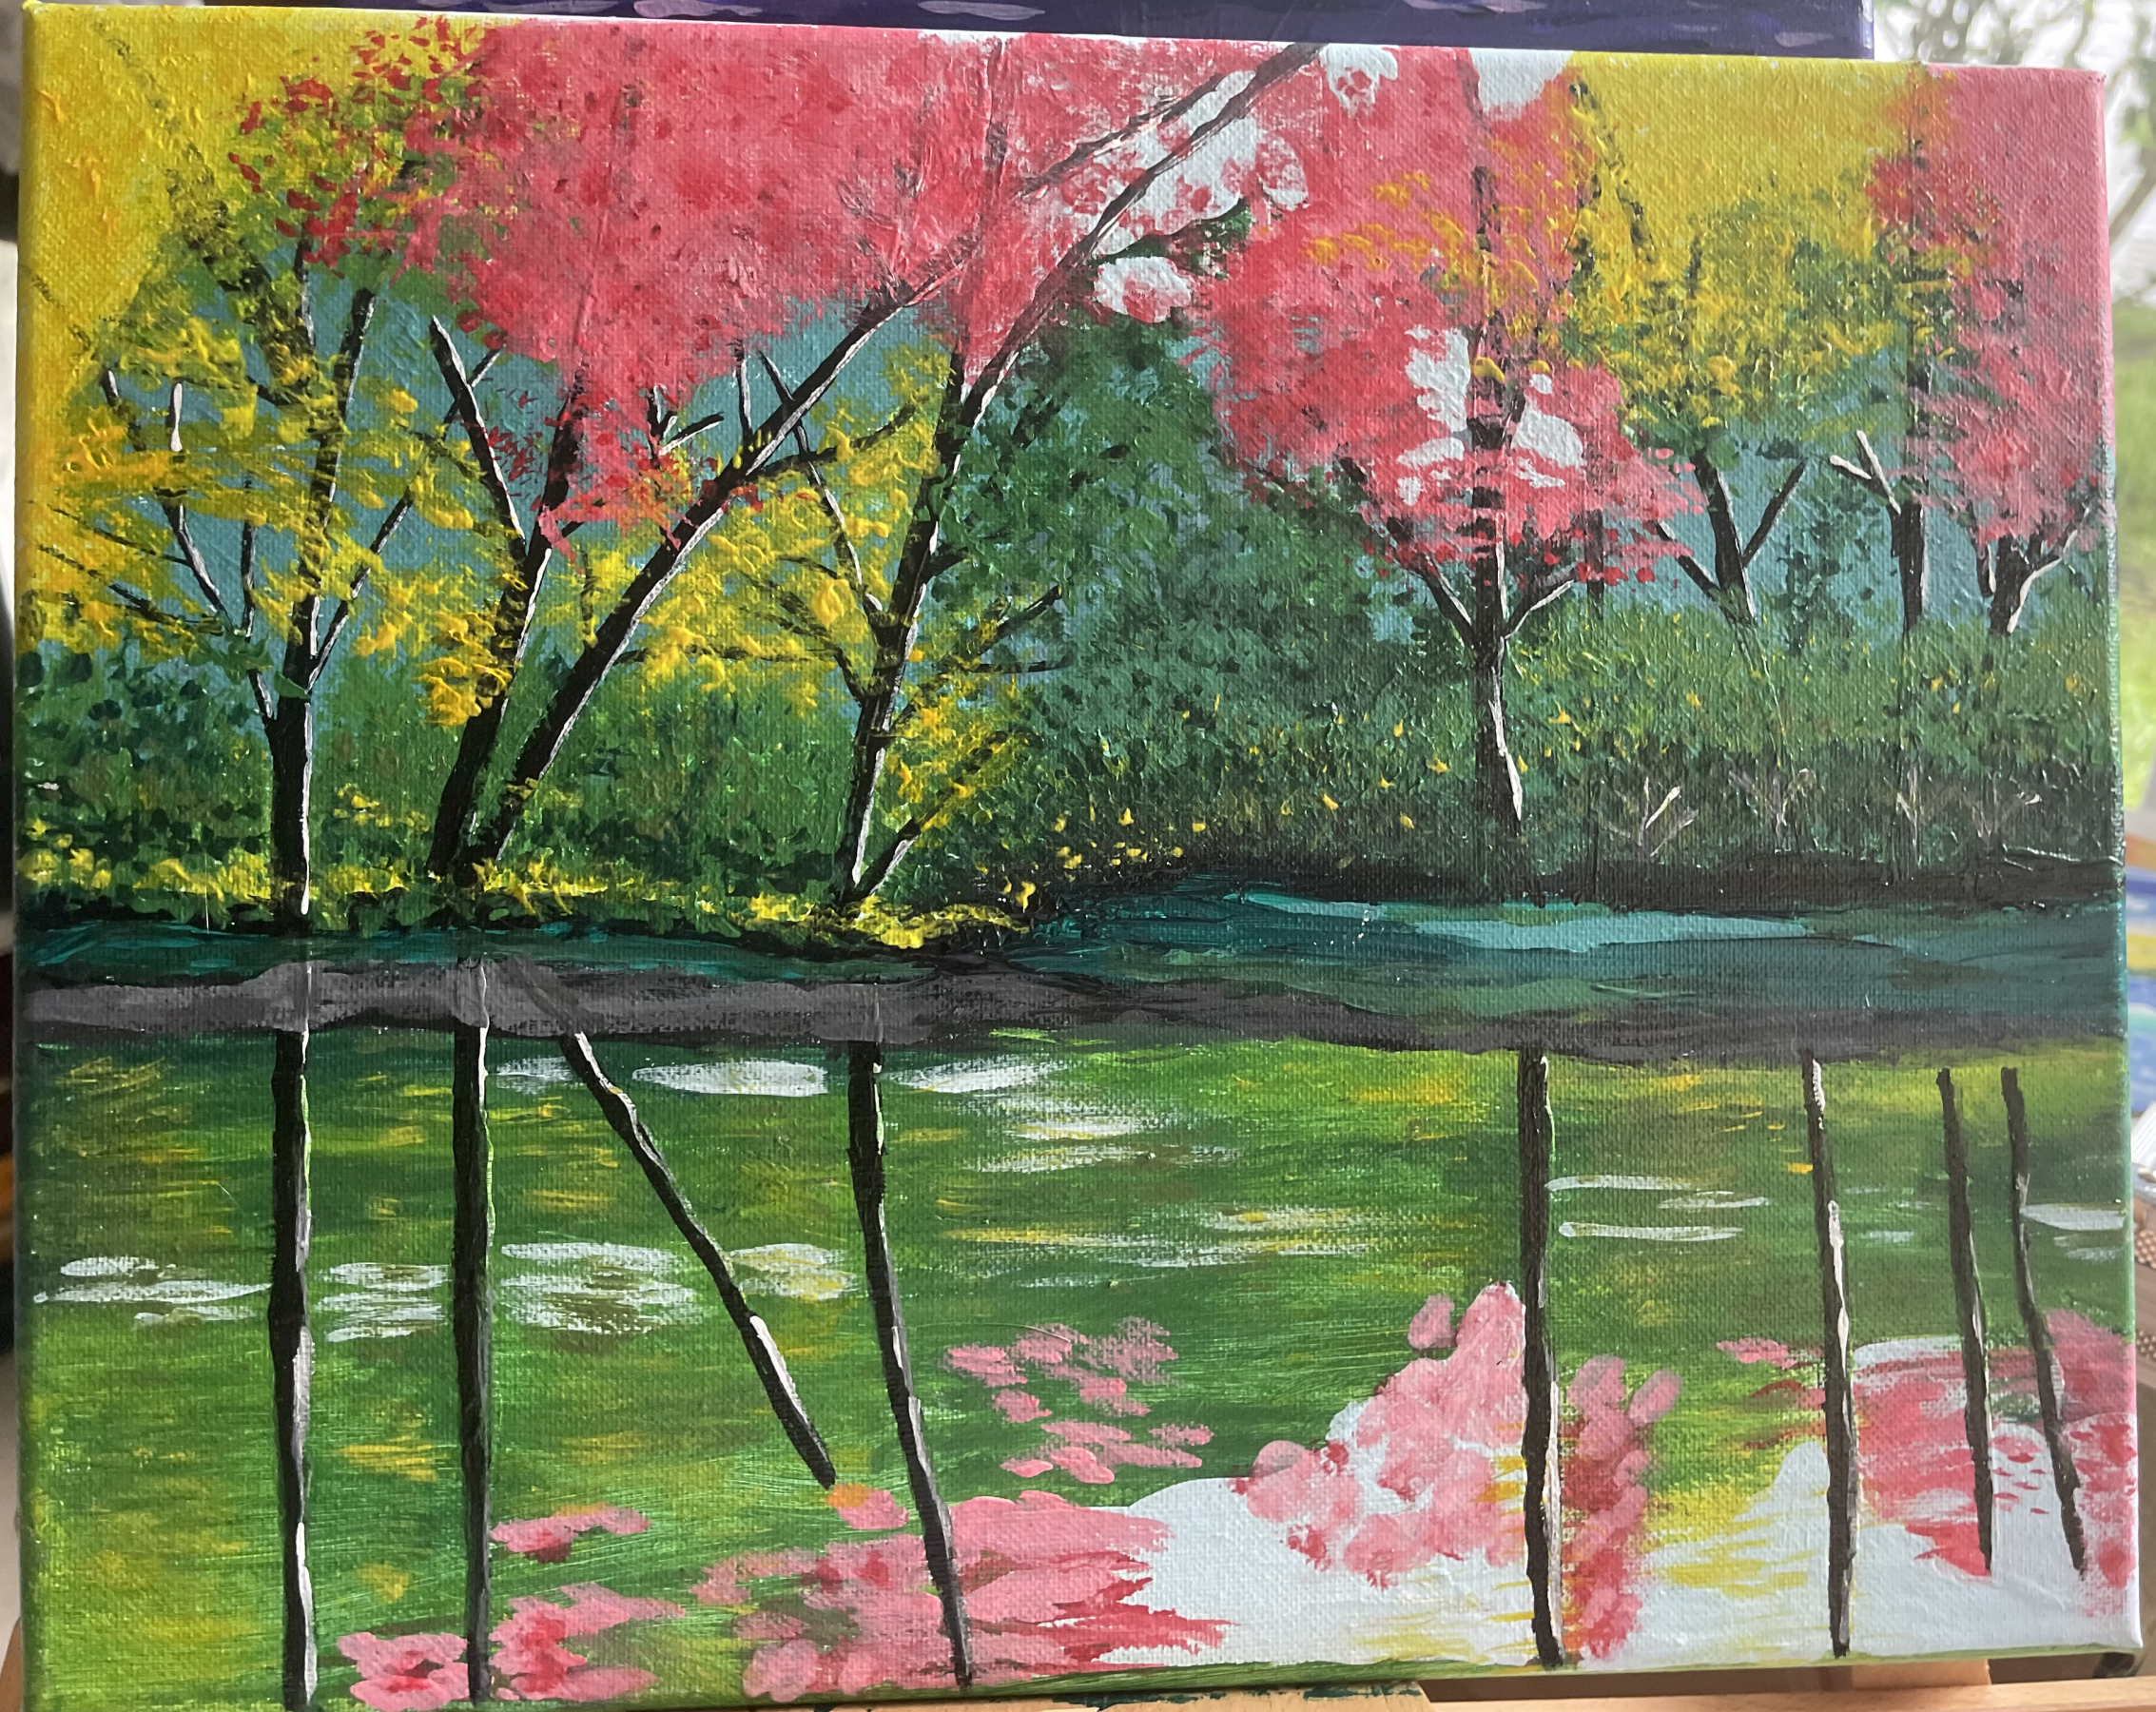 Painting of trees in fall by the river